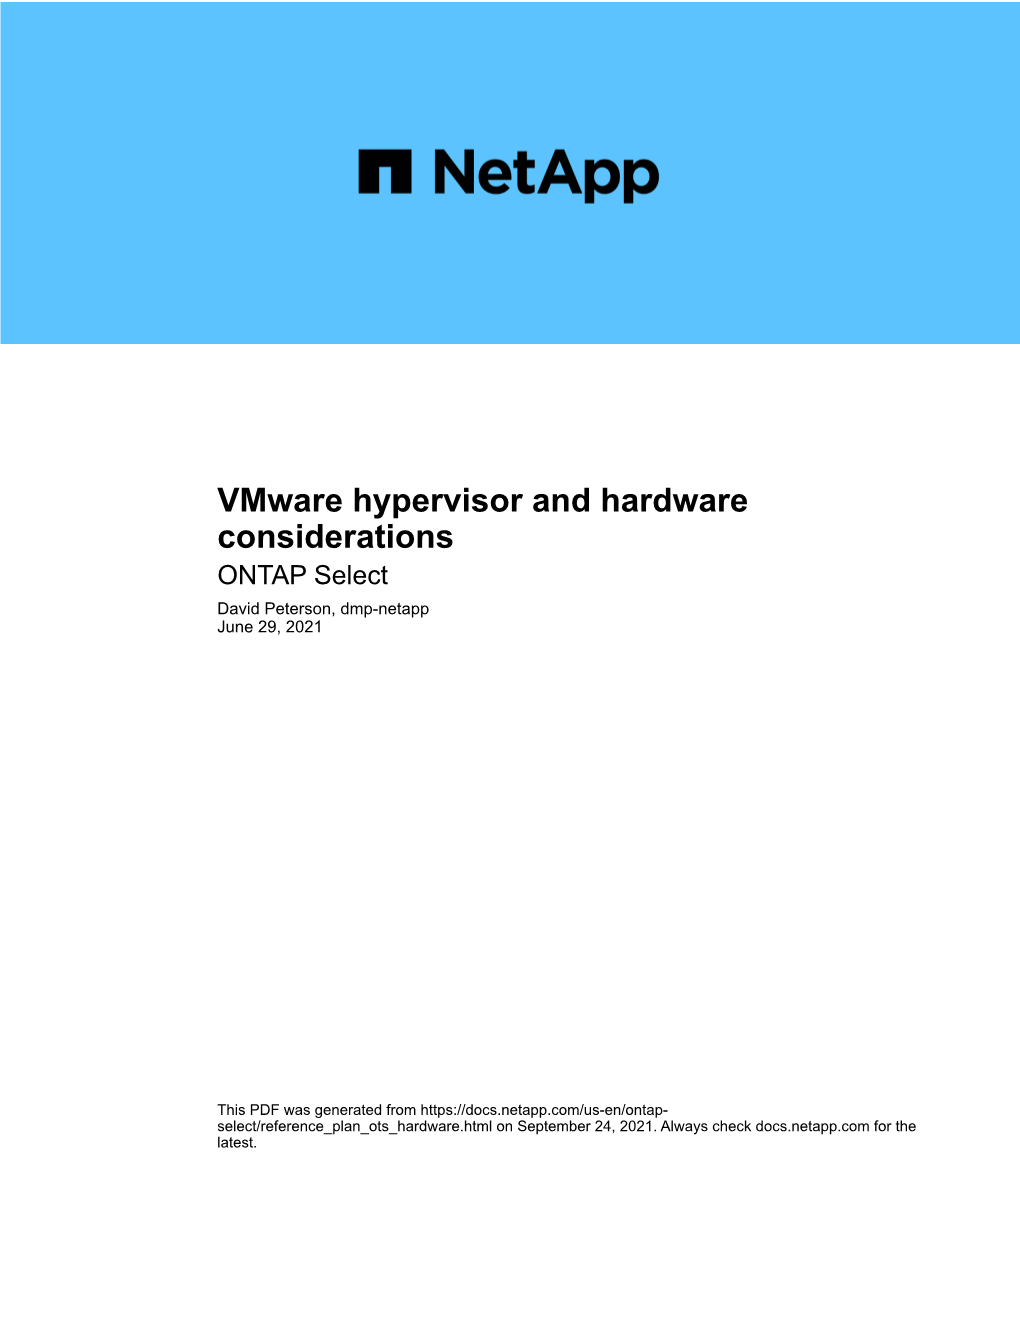 Vmware Hypervisor and Hardware Considerations : ONTAP Select